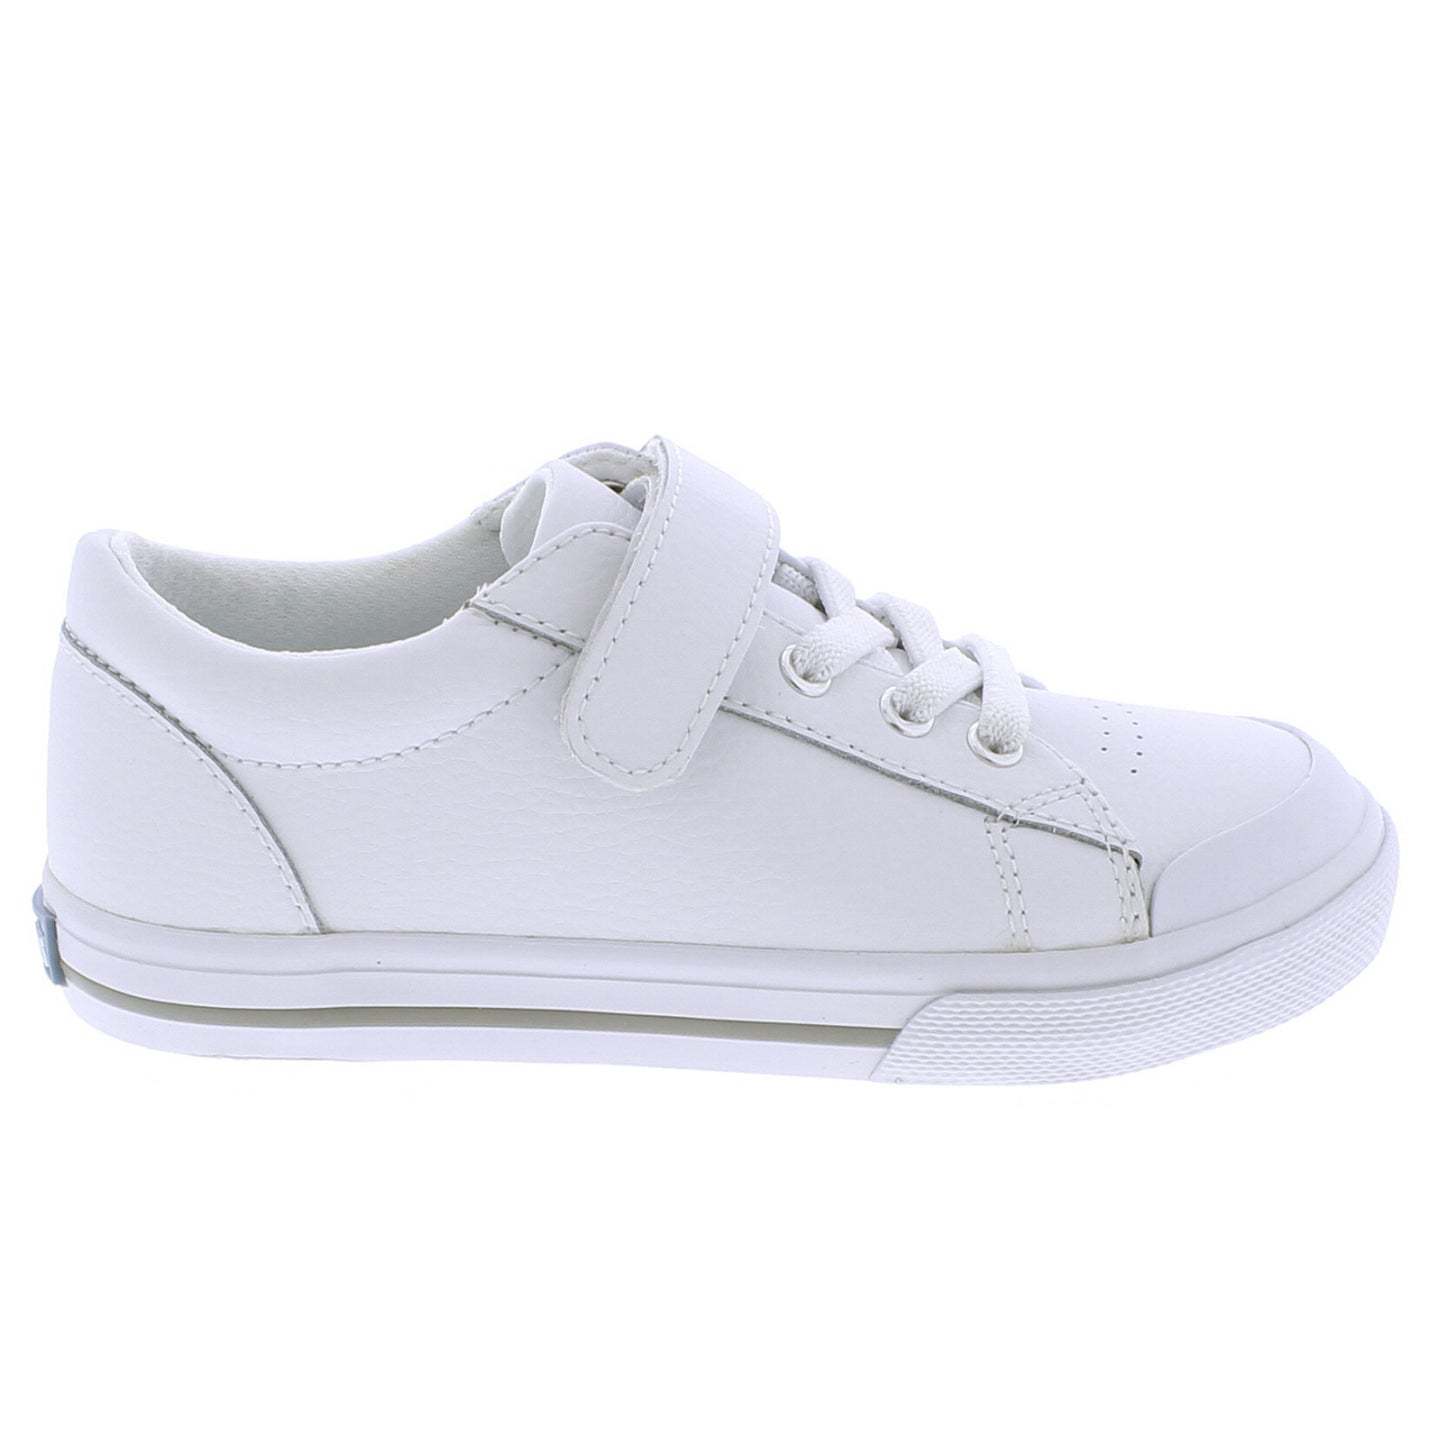 Reese - White Leather Boys Shoes Footmates   